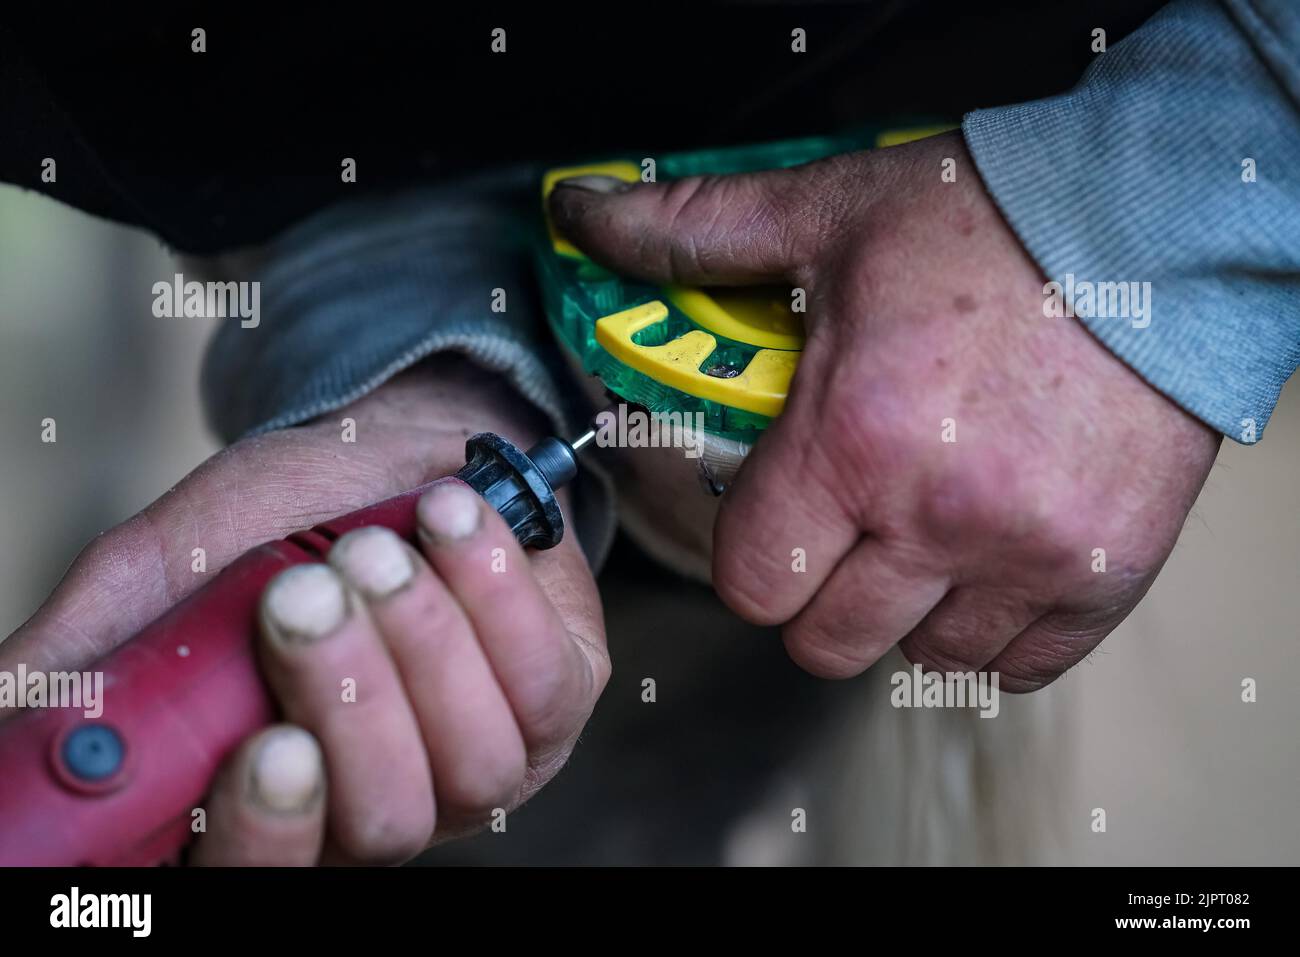 Man farrier installing plastic horseshoe to hoof. Closeup up detail to hands holding animal feet and rotary tool grinder Stock Photo